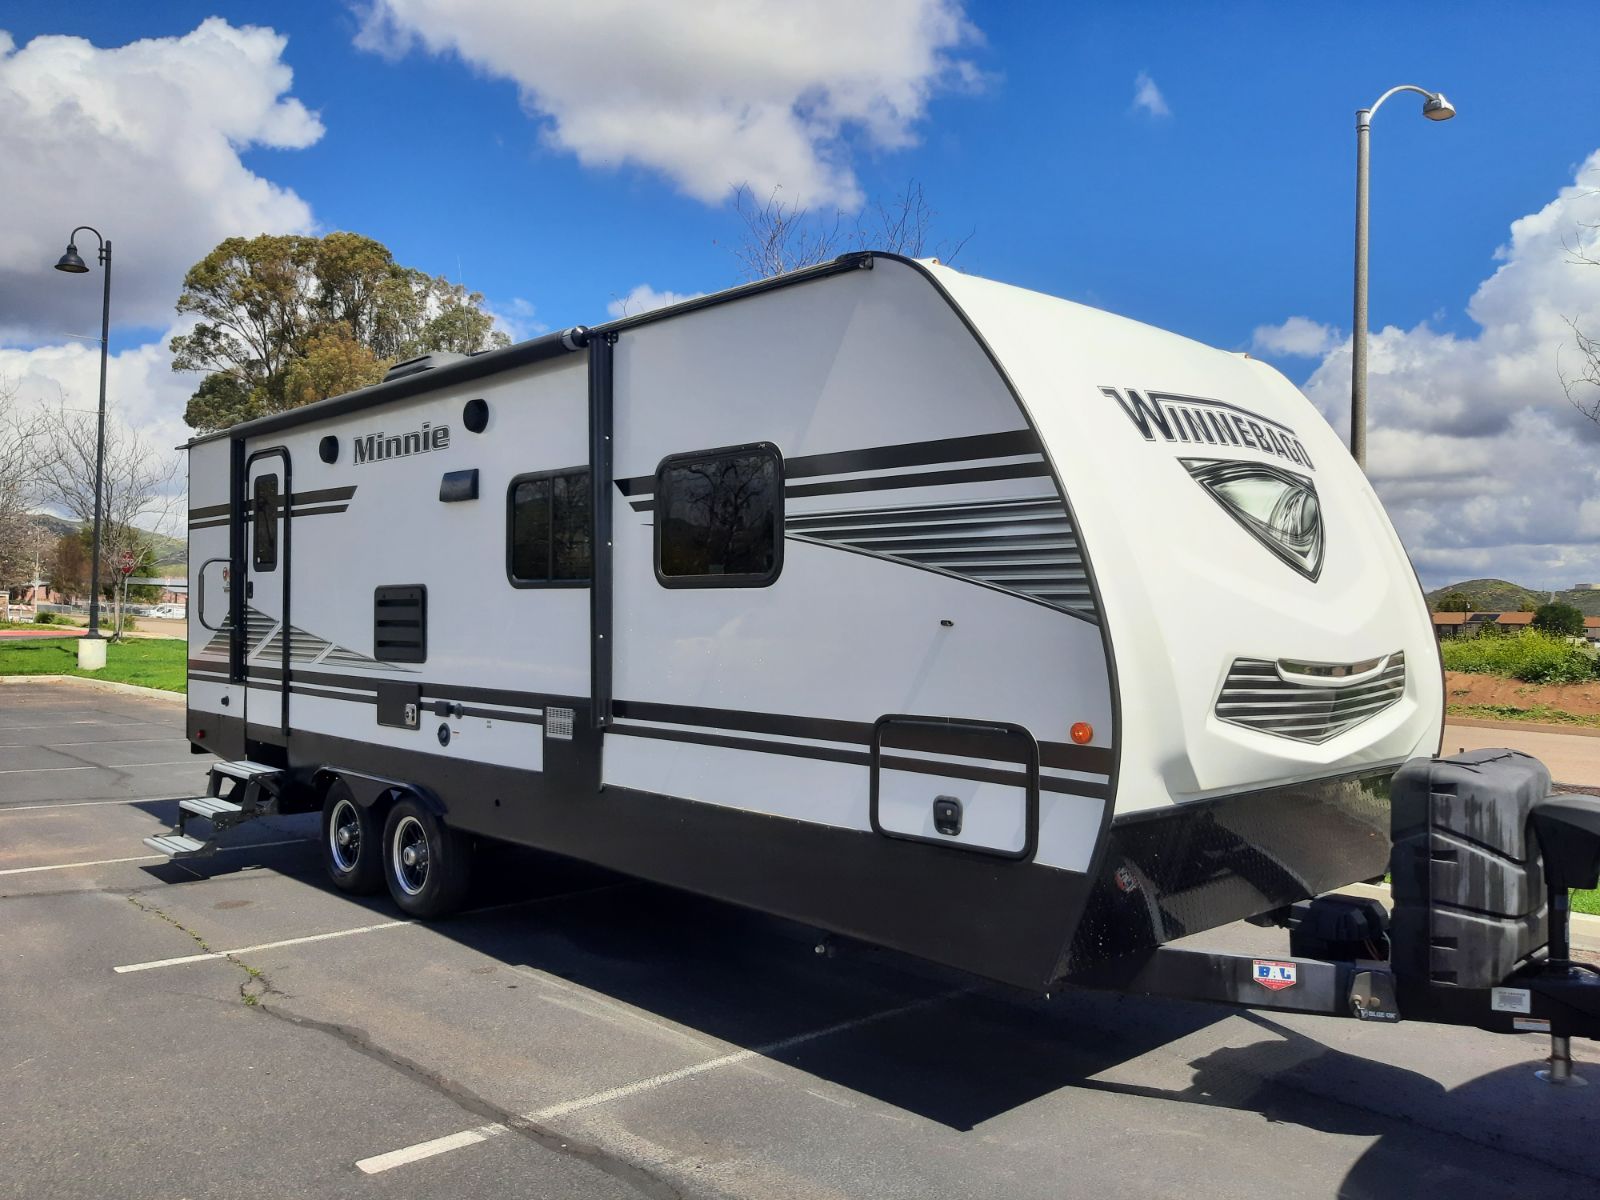 Have a travel trailer to sell in San Diego. We are ready to buy.